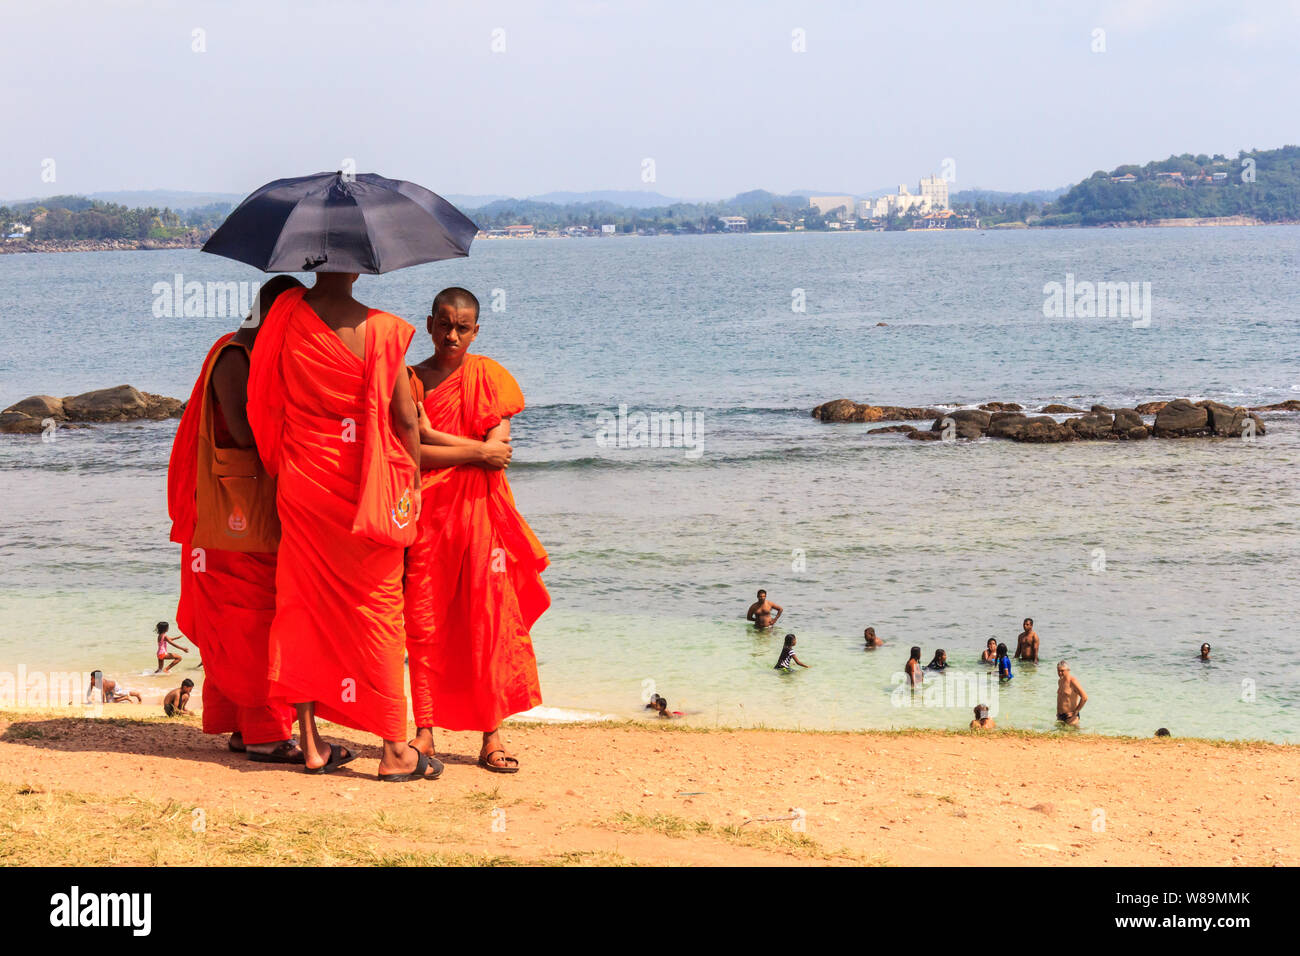 Galle, Sri Lanka - 30th December 2016: Monks shelter under an umbrella while people swim in the sea, The heat can be oppressive. Stock Photo